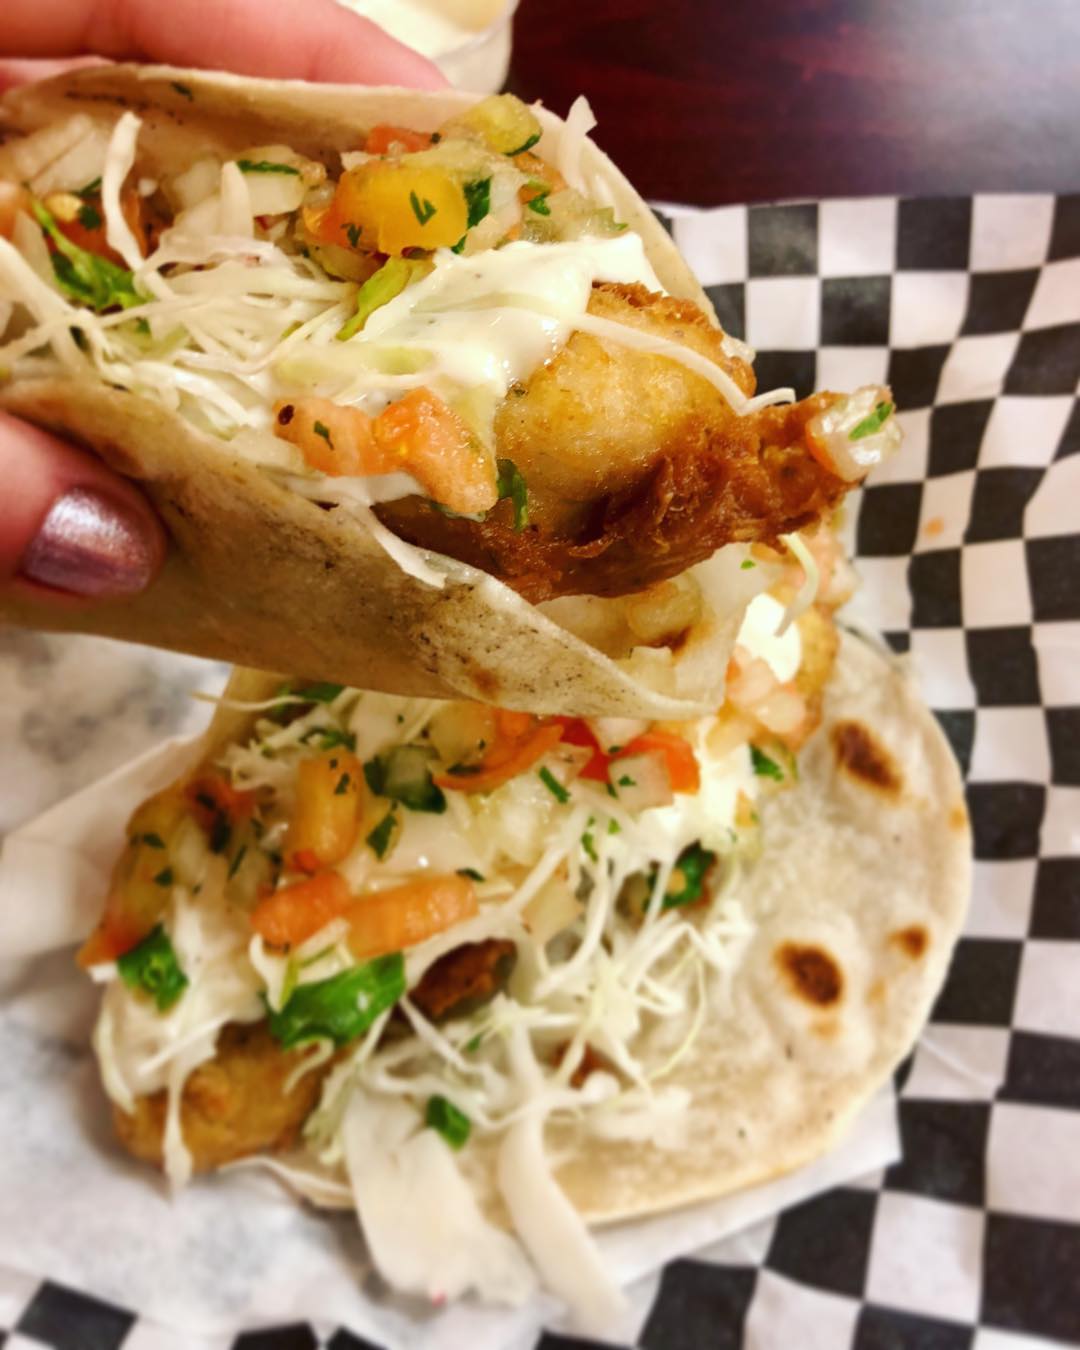 A person holding up a fish taco.